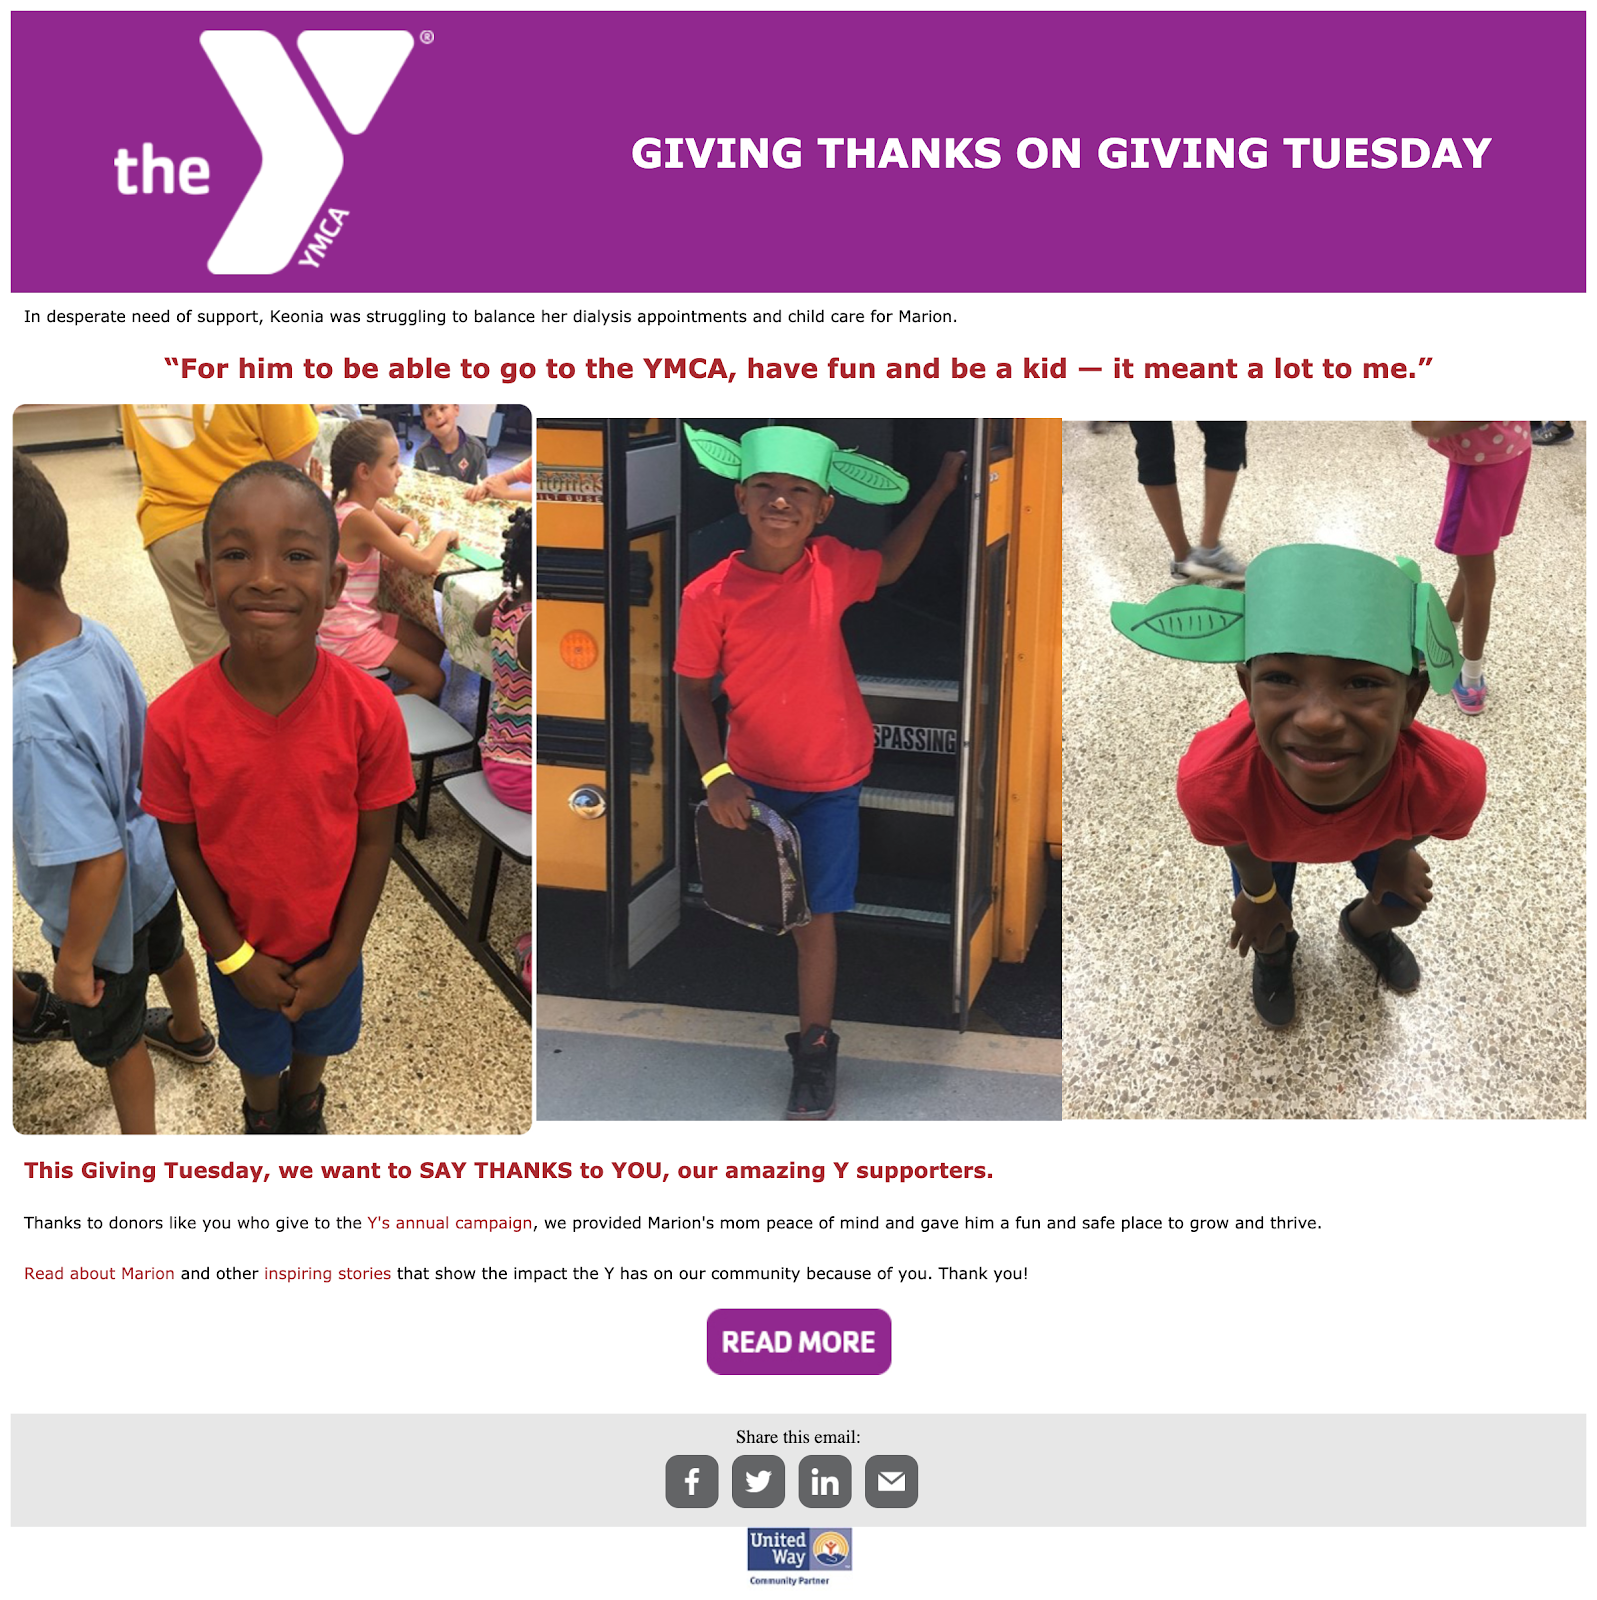 The YMCA giving tuesday email